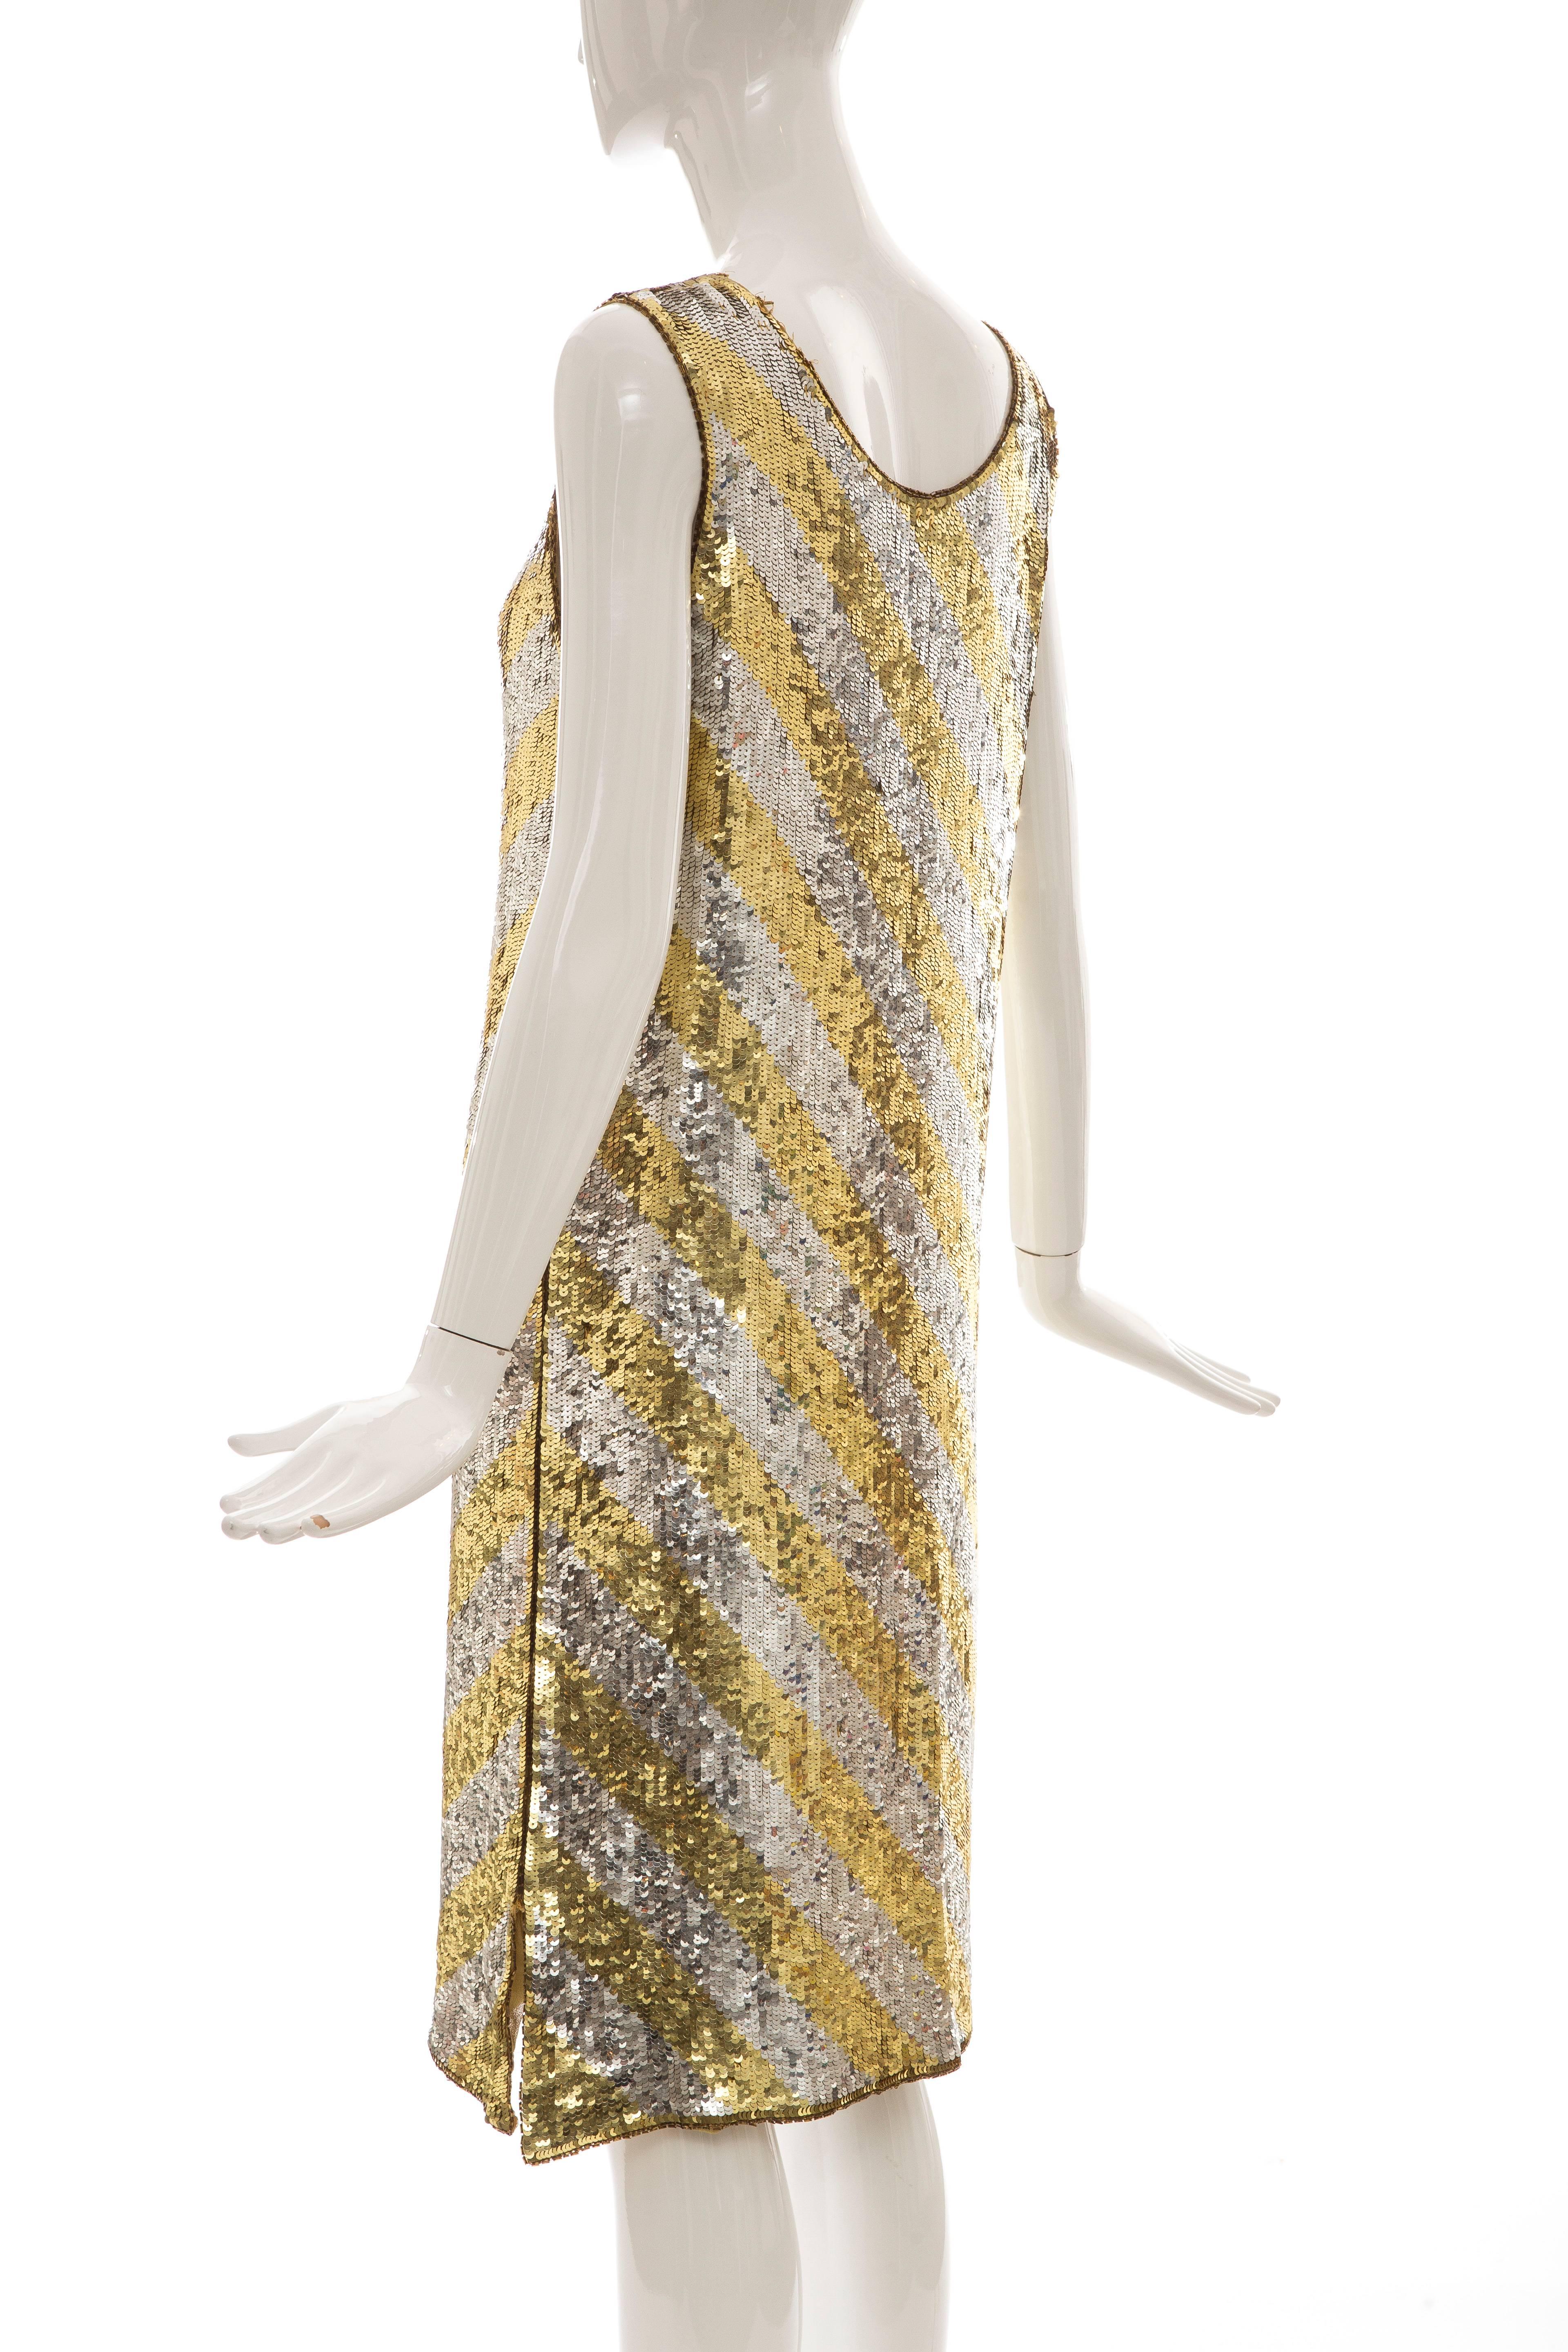  Marc Bohan for Christian Dior Embroidered Sequin Dress, Circa 1970s For Sale 1